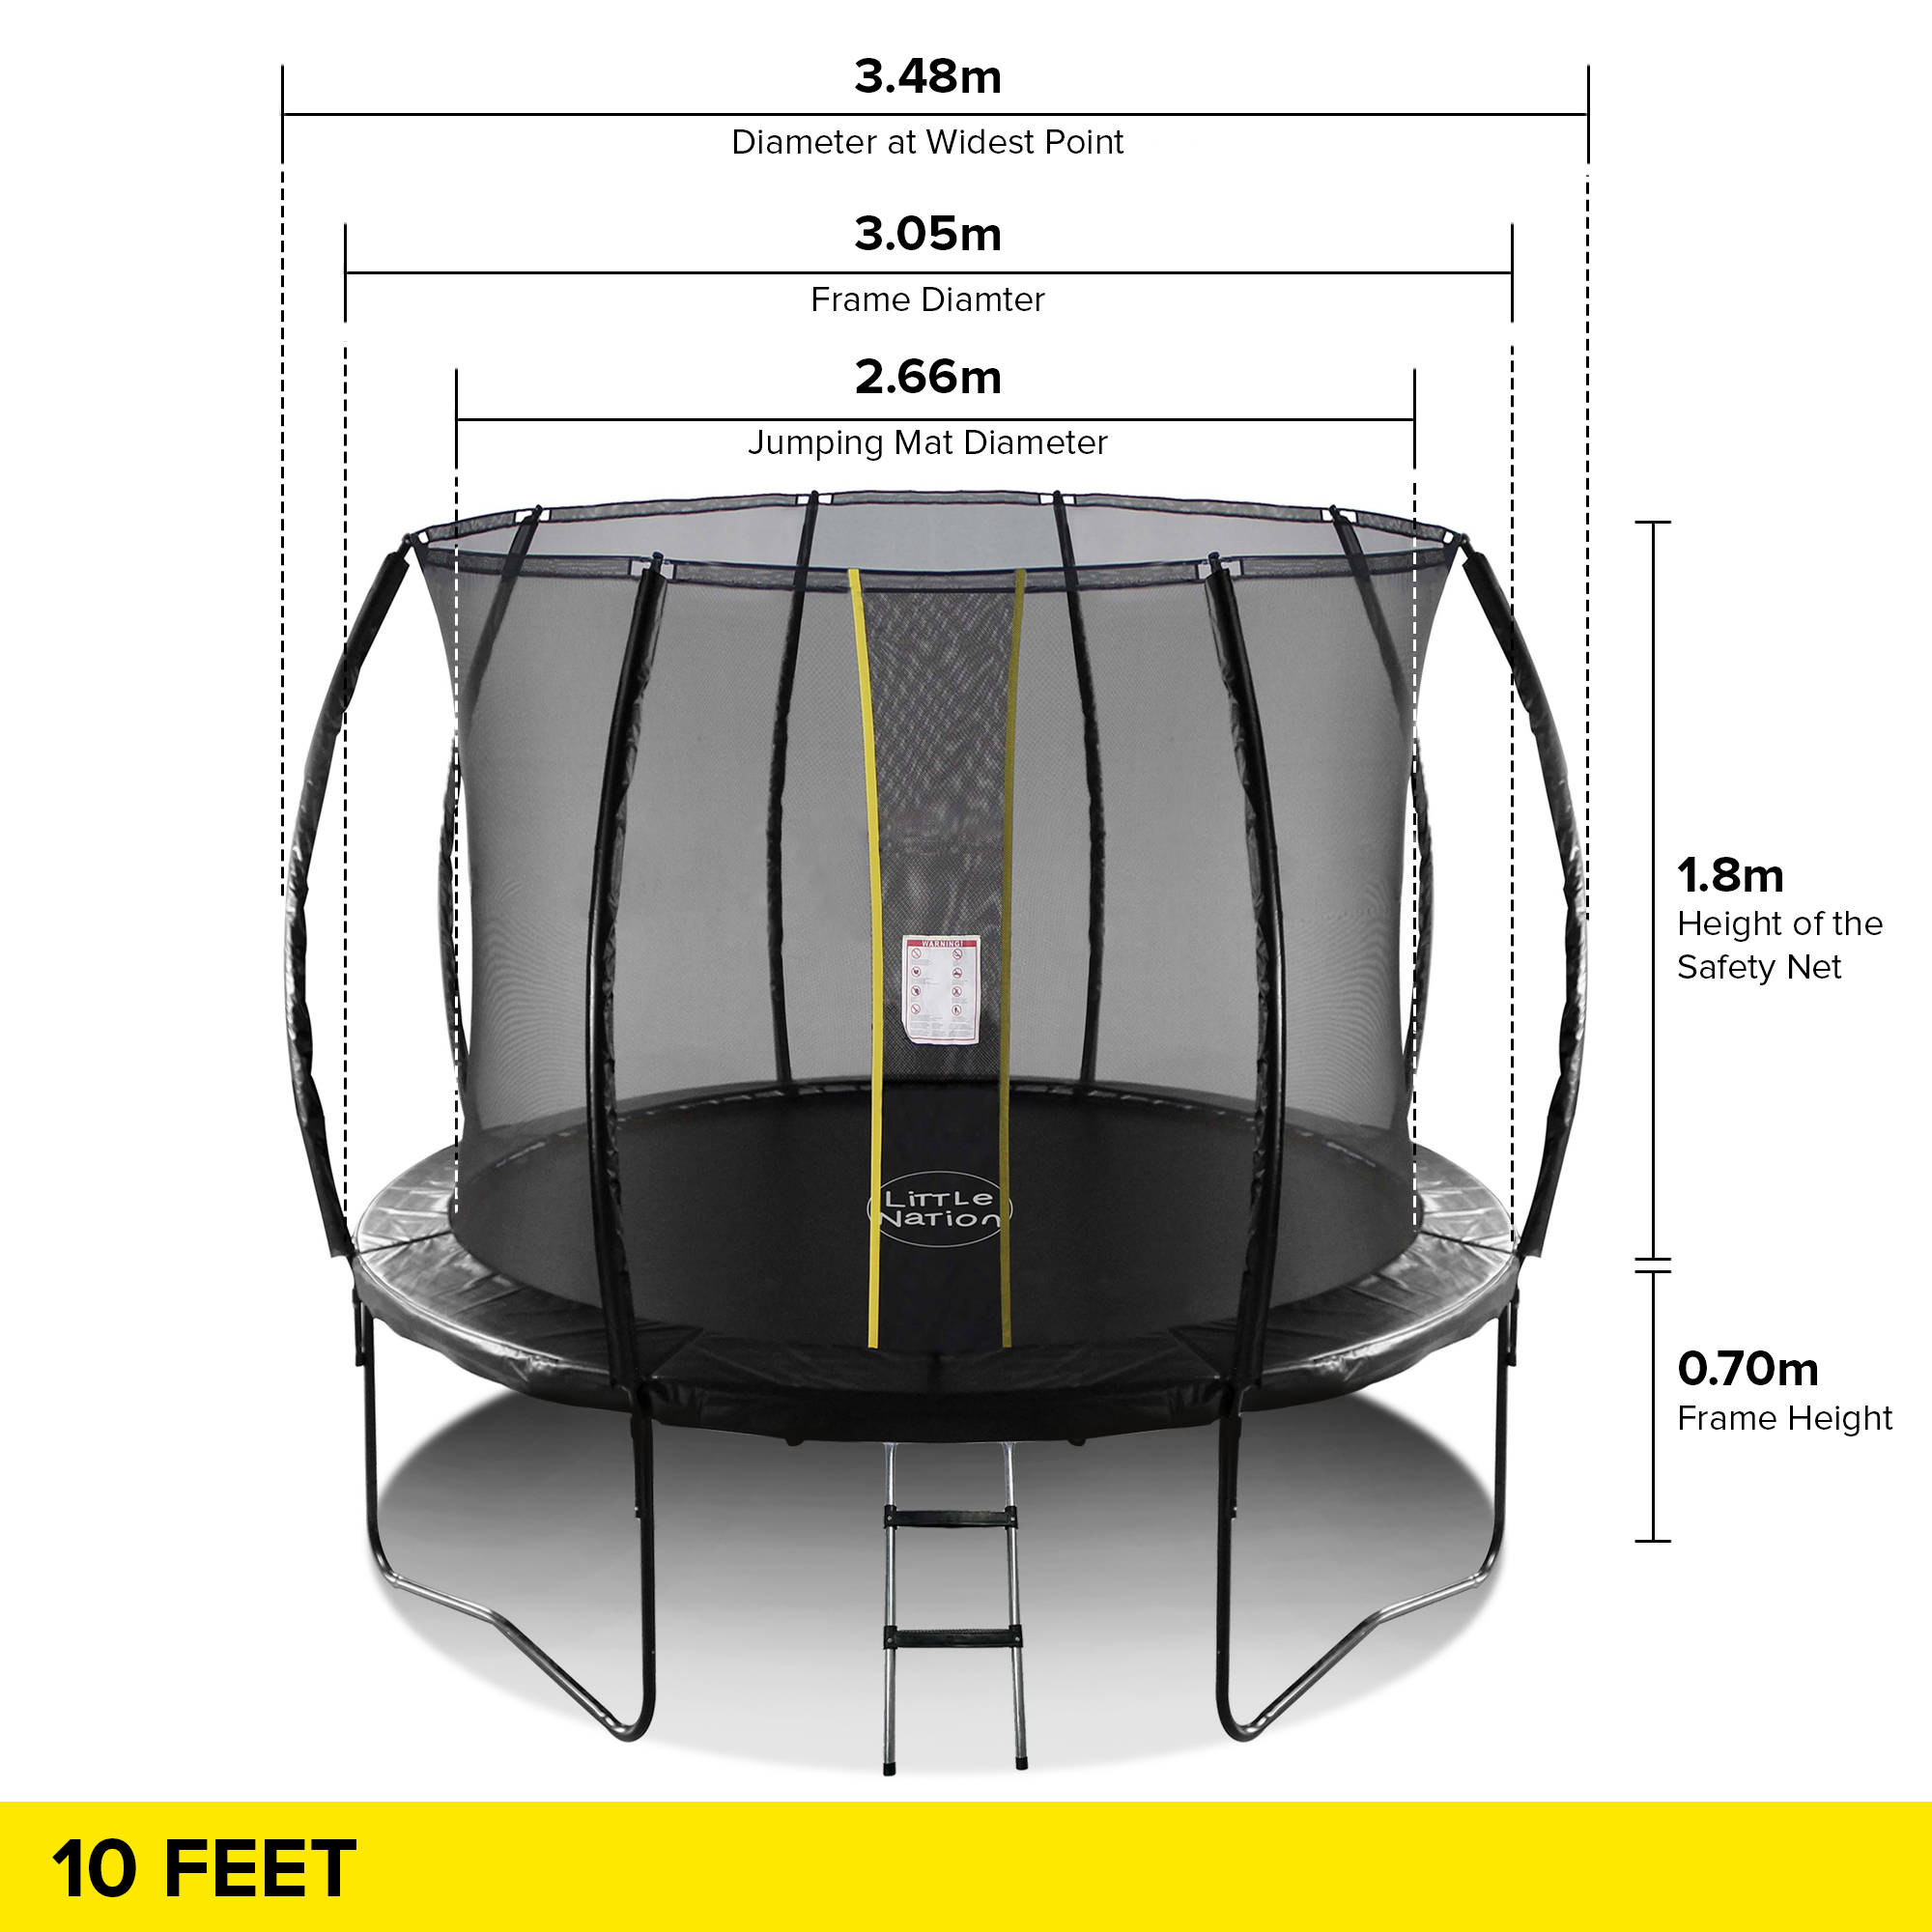 10ft Trampoline – Little Nation, Kids Toys, School Accessories, Trampolines,  Electronics